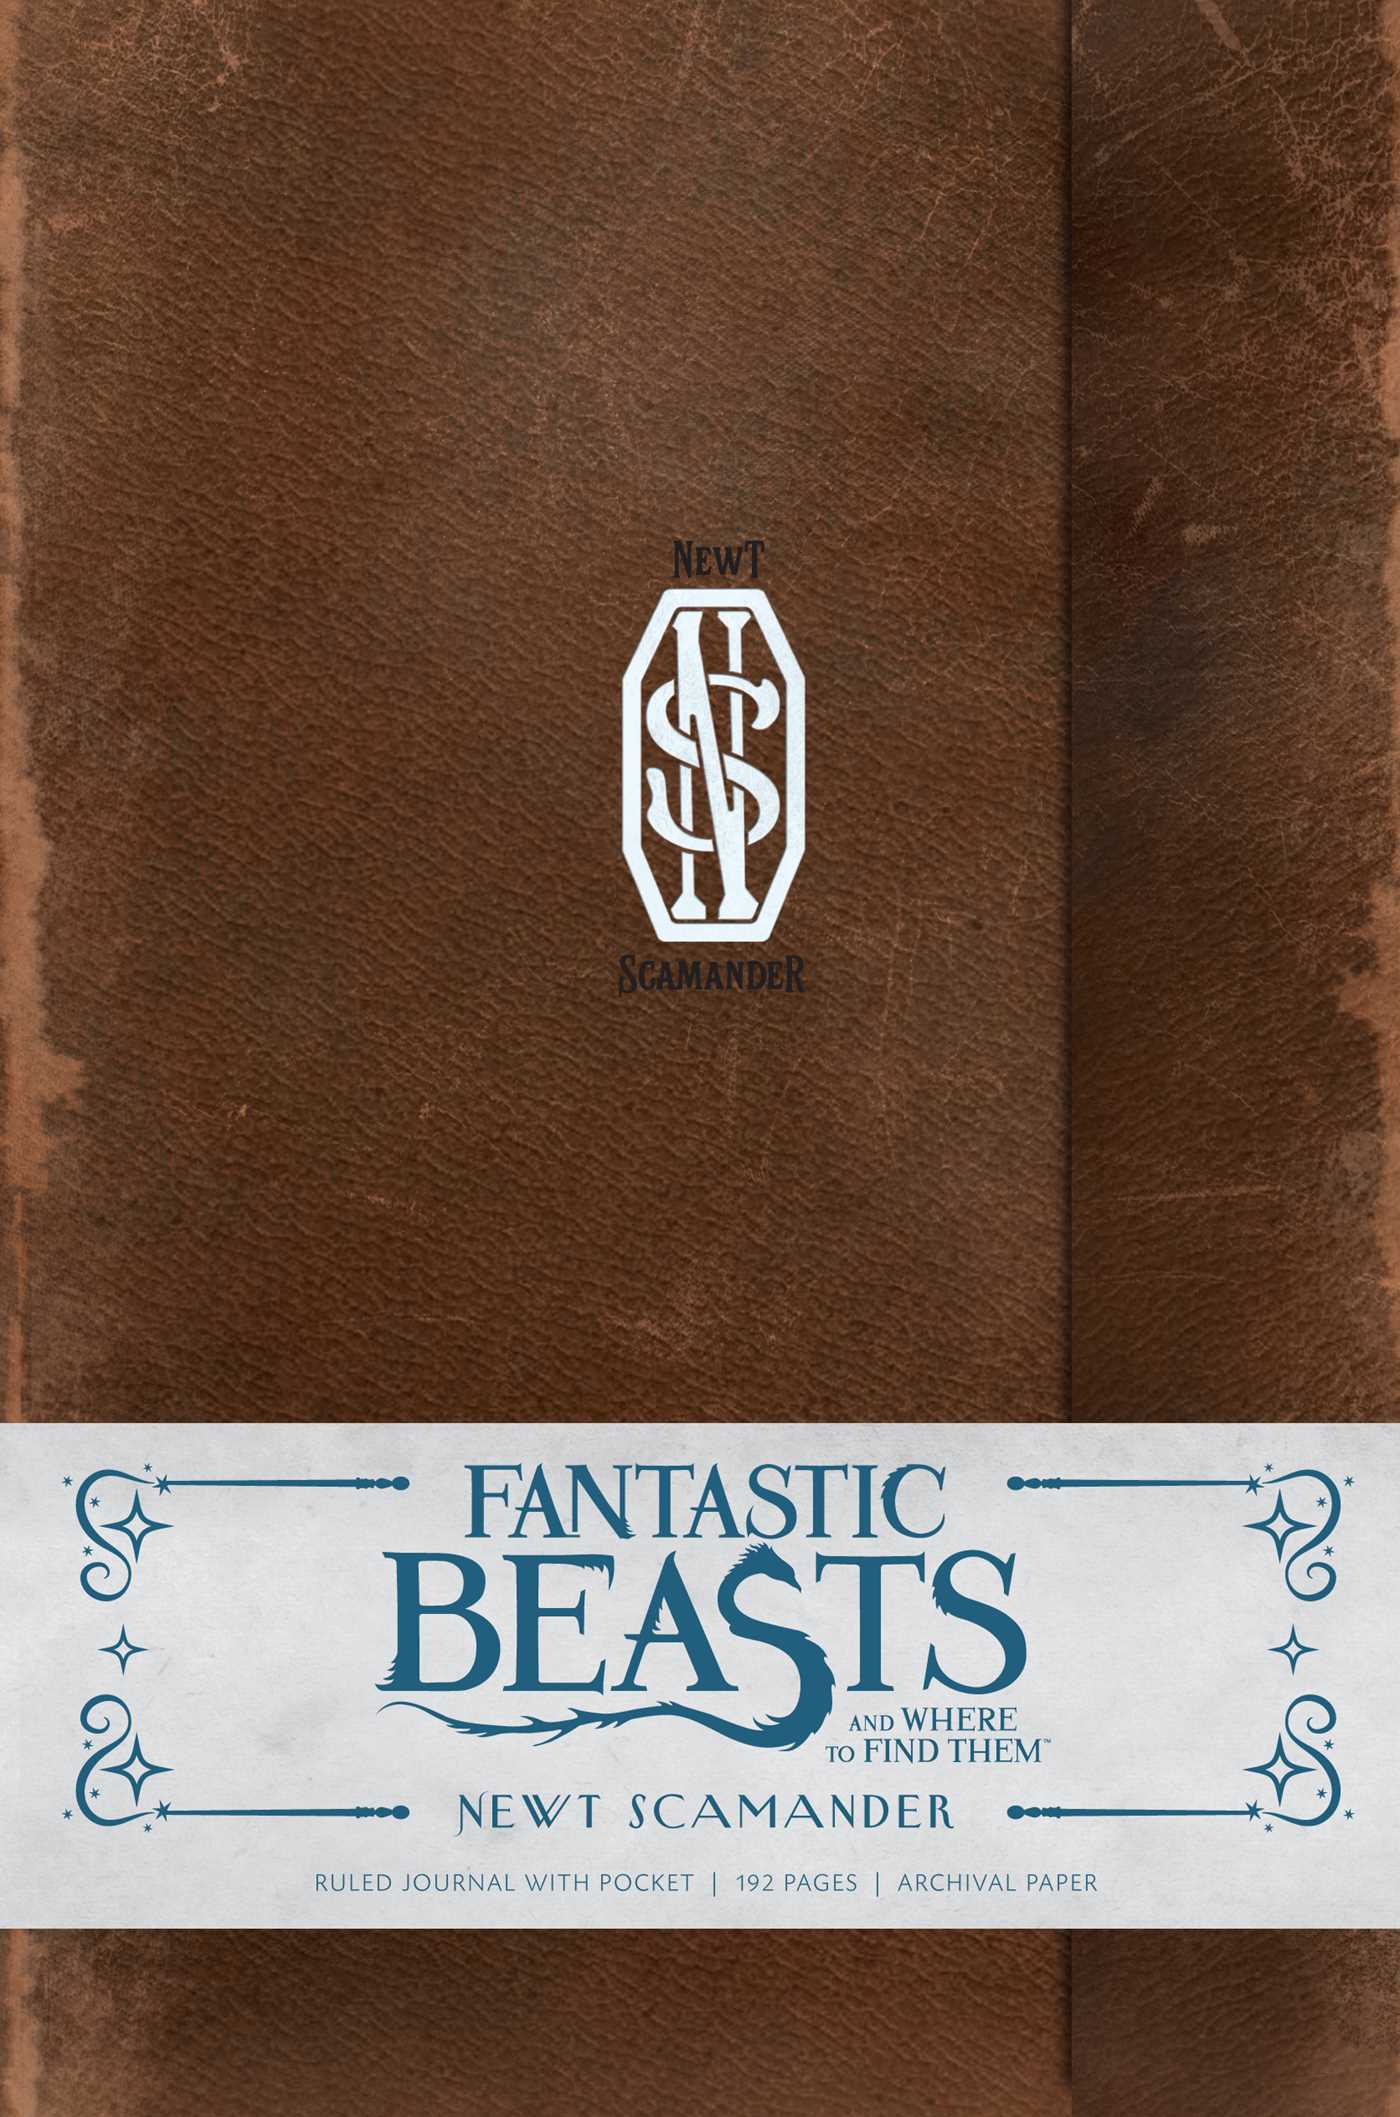 Harry Potter Fantastic Beasts and Where to Find Them: Newt Scamander Hardcover Ruled Journal hardcover